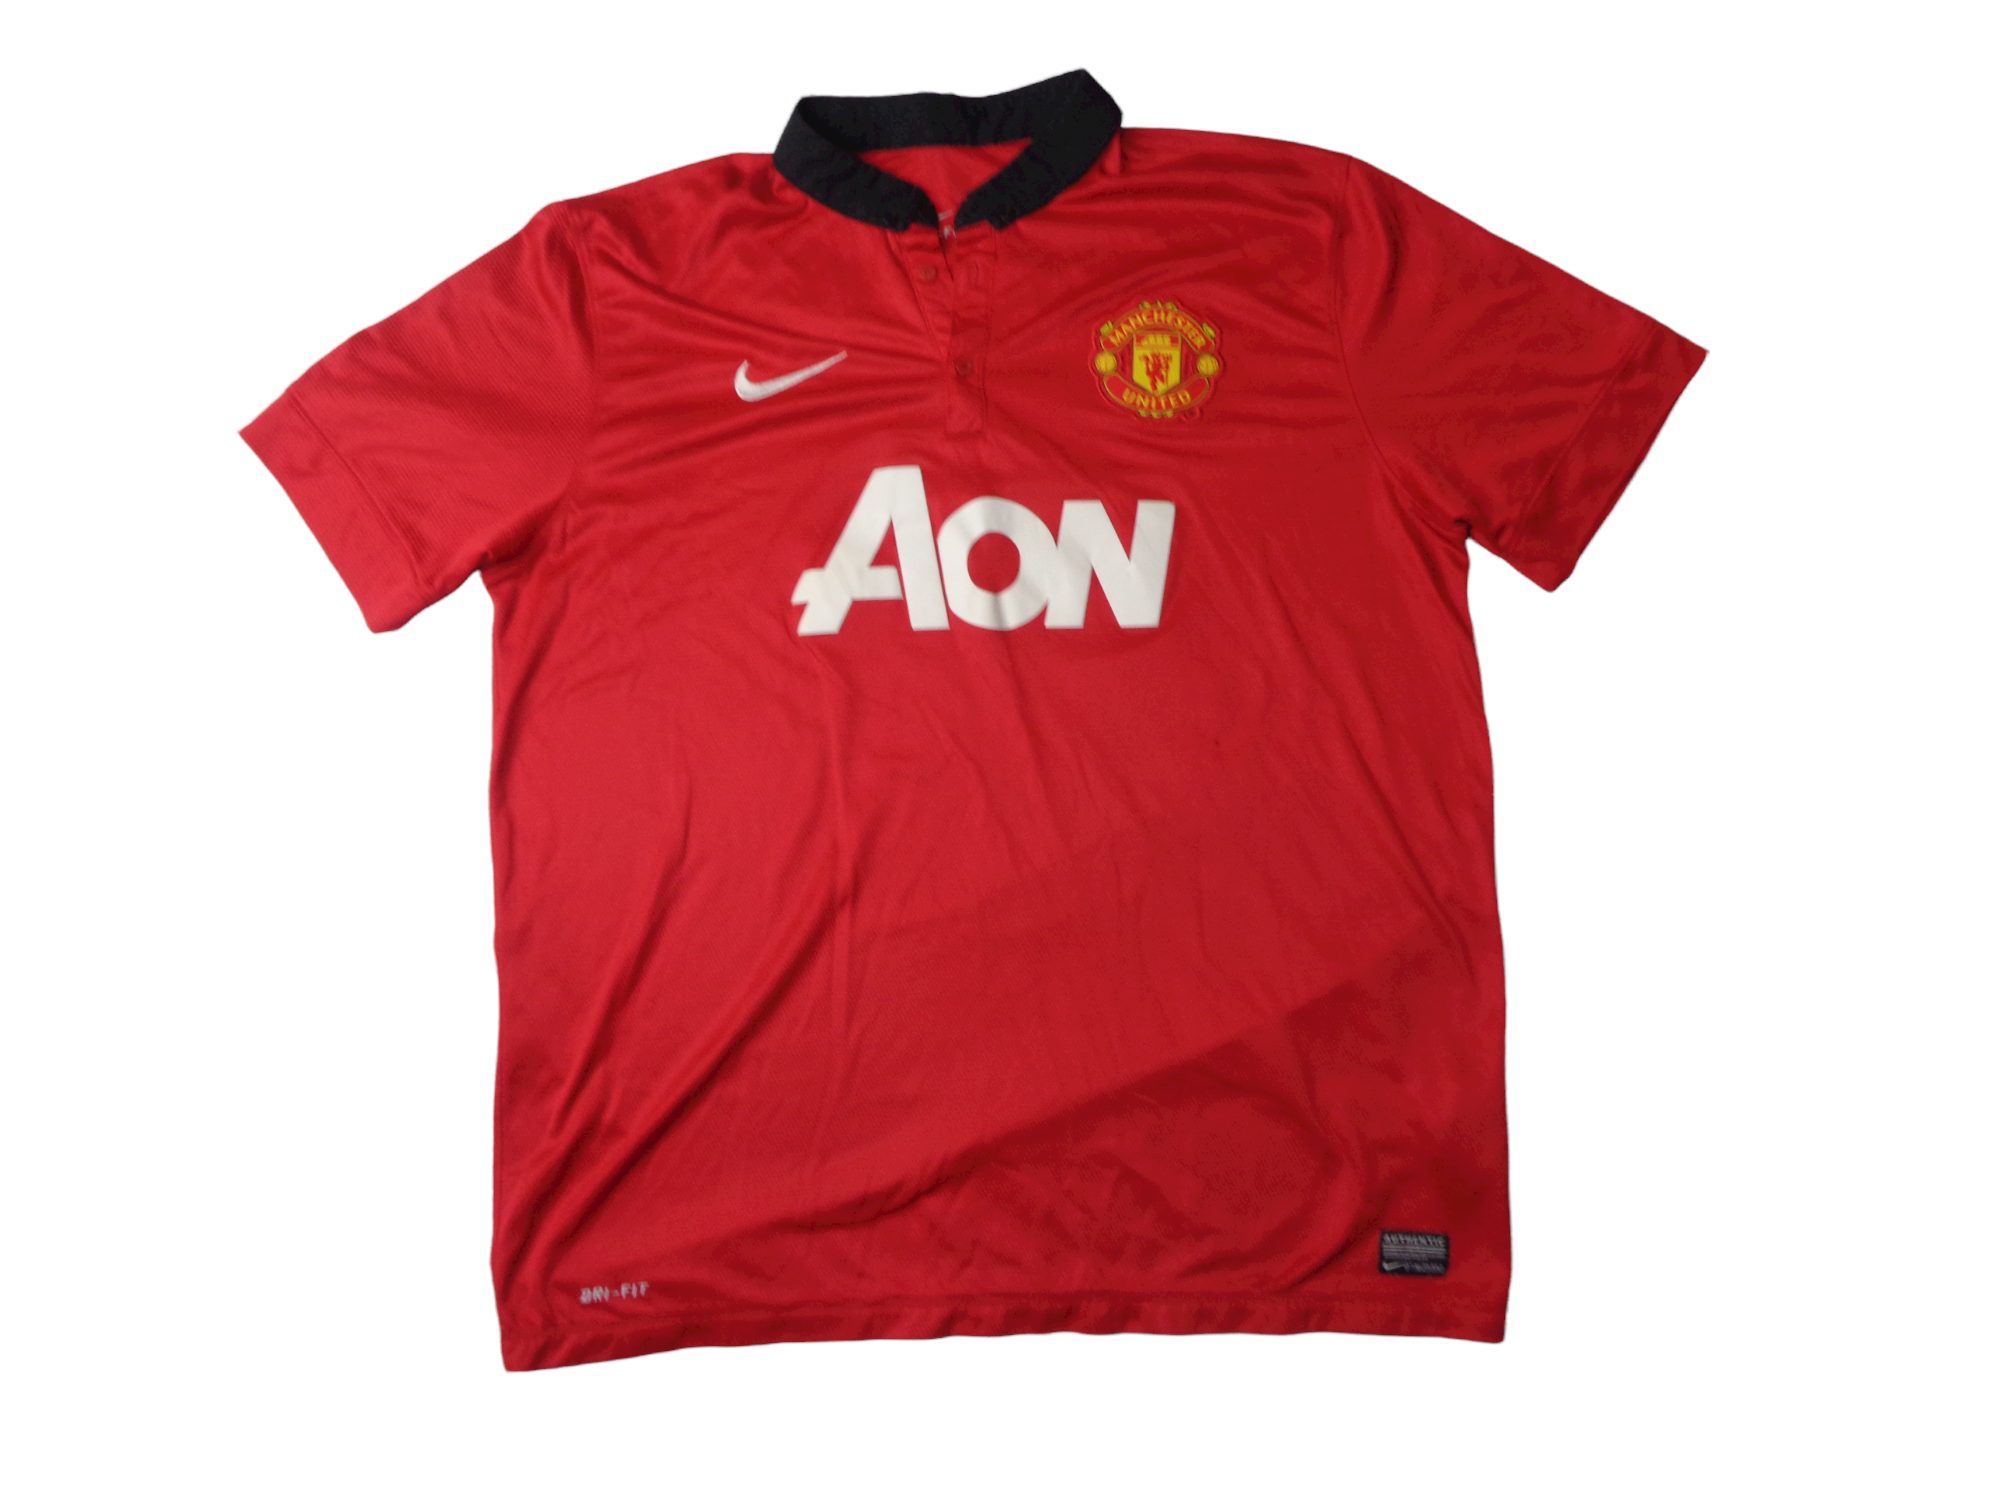 V. PERSIE #20 - MANCHESTER UNITED 2013/14 HOME SHIRT - NIKE - SIZE XL